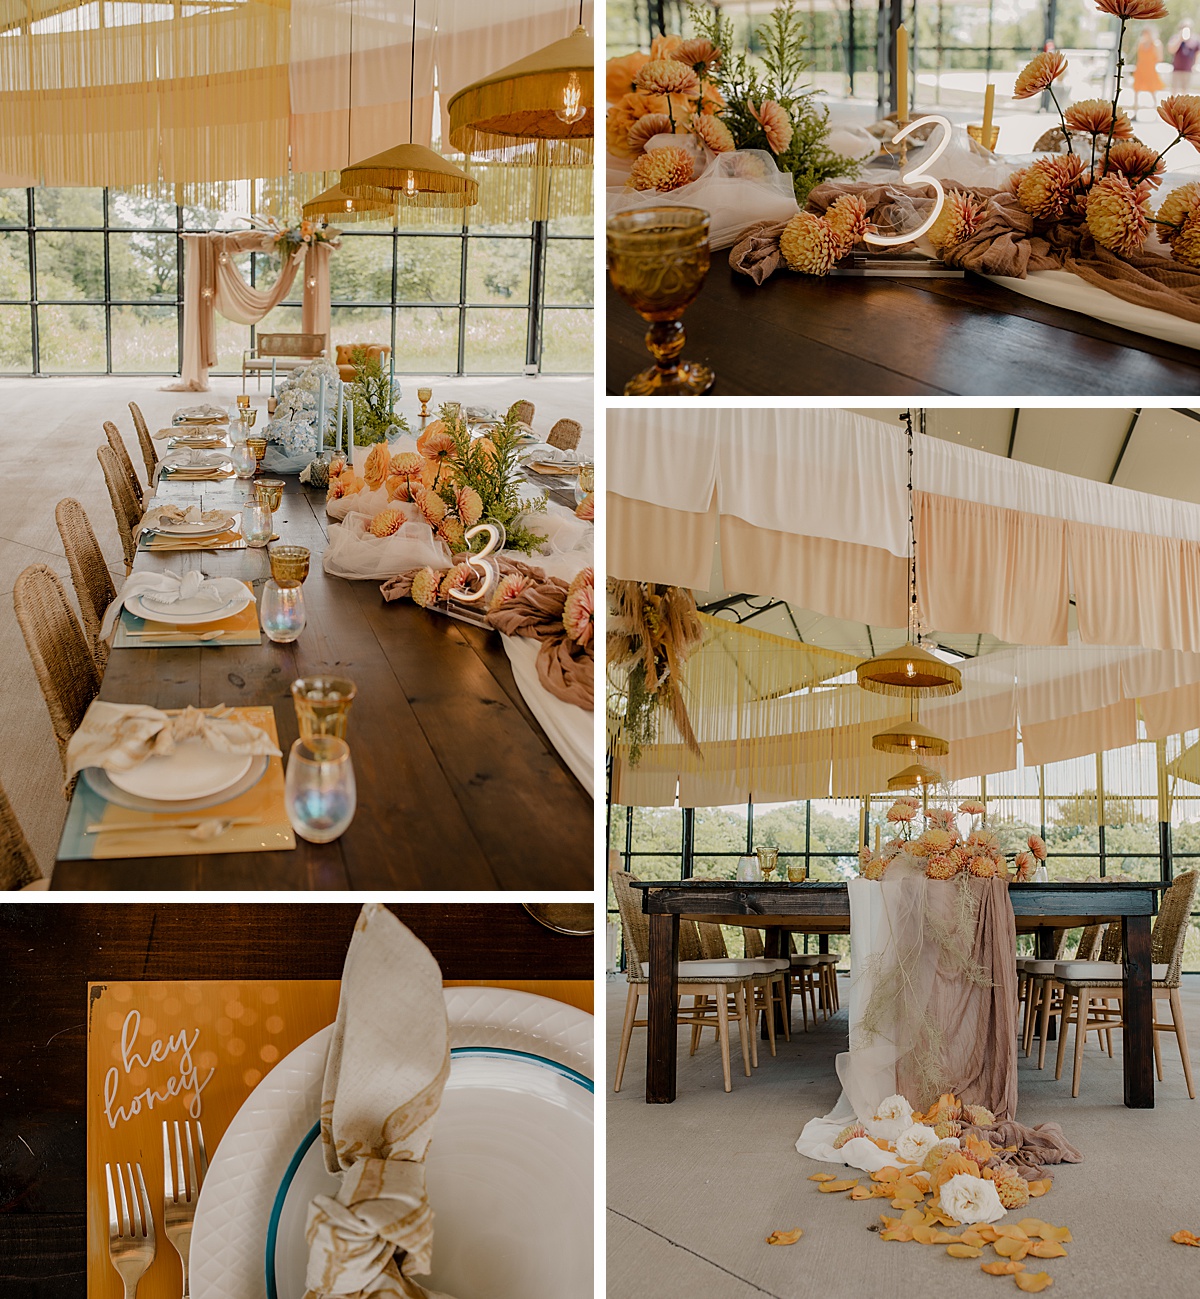 Colorful boho wedding tablescape design and table decor from this styled branding shoot in Kansas City.